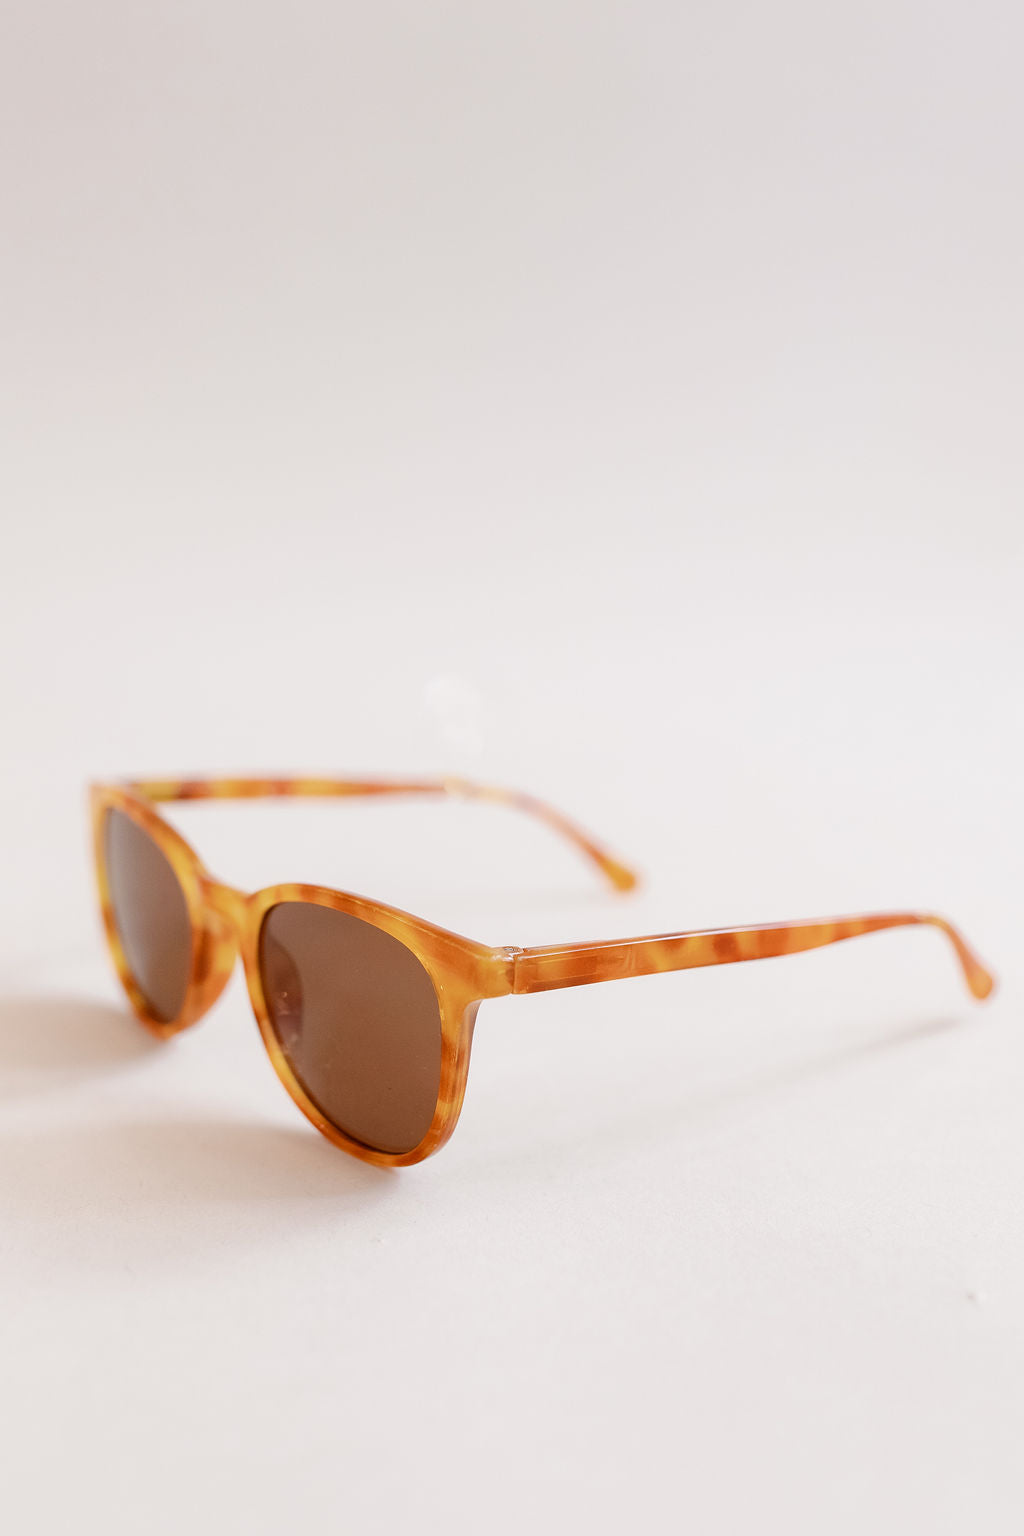 Arrived Sunnies | Assorted - Poppy and Stella